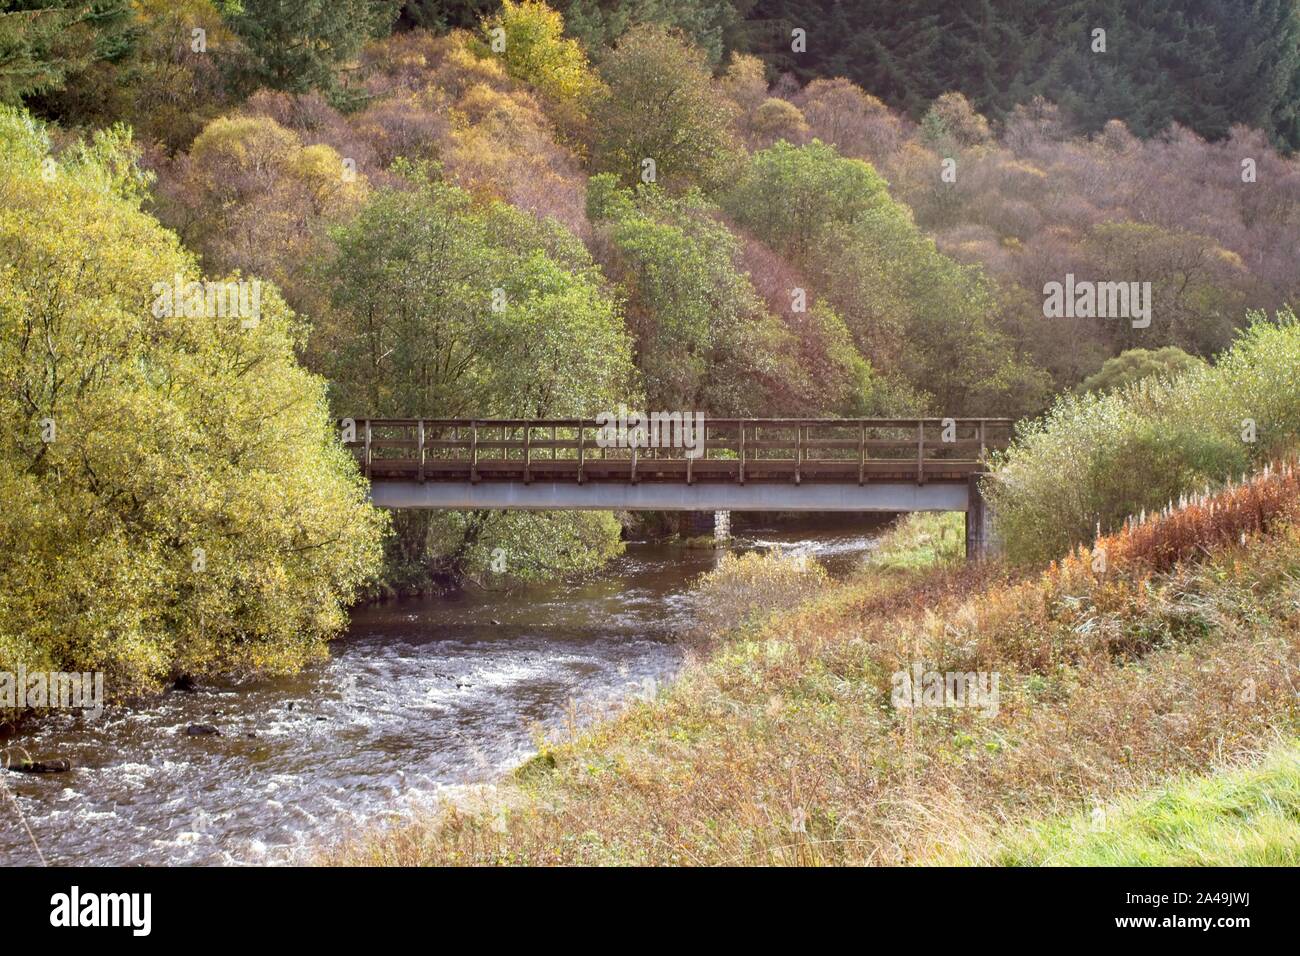 A bridge crosses Ettrick Water in the Scottish Borders between Langholm and Hawick near to Angecroft Park on the A709. Stock Photo